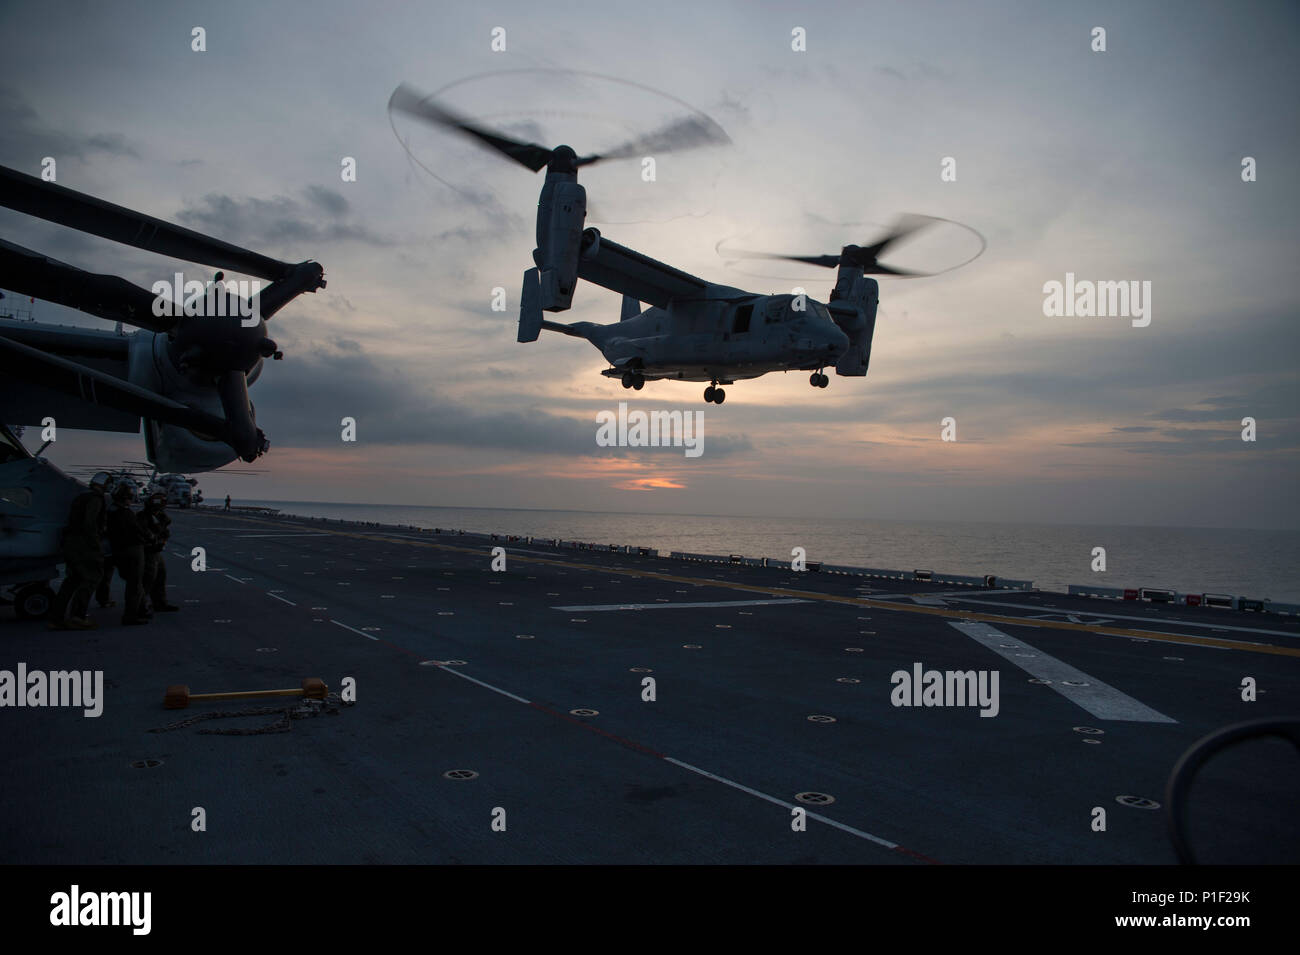 161022-N-XK809-040 SOUTH CHINA SEA (Oct. 22, 2016) An MV-22 Osprey, assigned to the Flying Tigers of Marine Medium Tiltrotor Squadron (VMM) 262, lands on the flight deck of amphibious assault ship USS Bonhomme Richard (LHD 6). Bonhomme Richard, flagship of the Bonhomme Richard Expeditionary Strike Group, is operating in the South China Sea in support of security and stability in the Indo-Asia Pacific region. (U.S. Navy photo by Petty Officer 3rd Class William Sykes/Released) Stock Photo